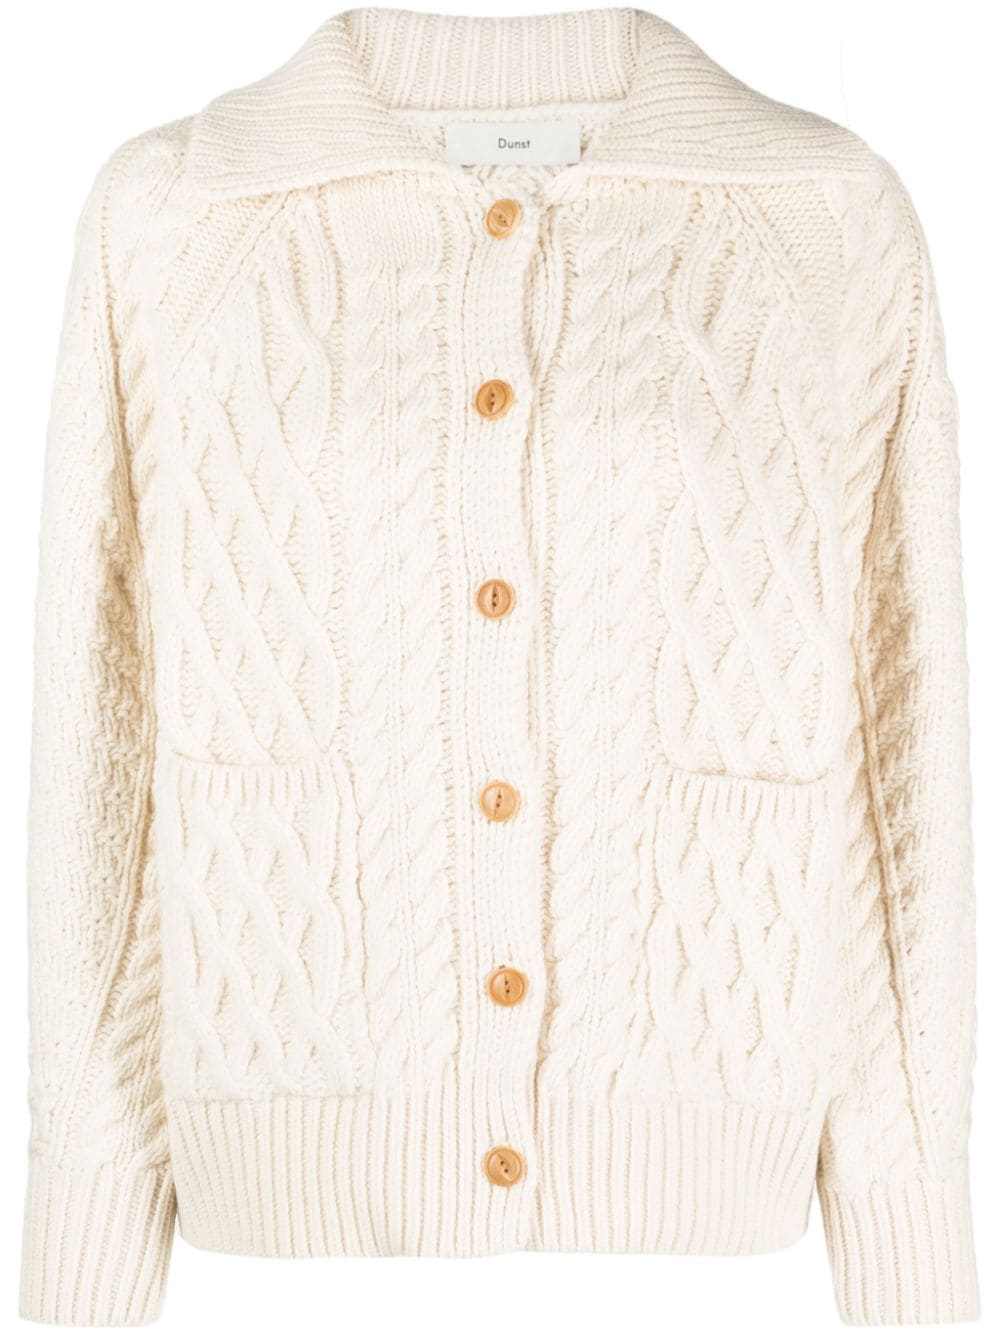 DUNST CABLE-KNIT BUTTON-UP CARDIGAN